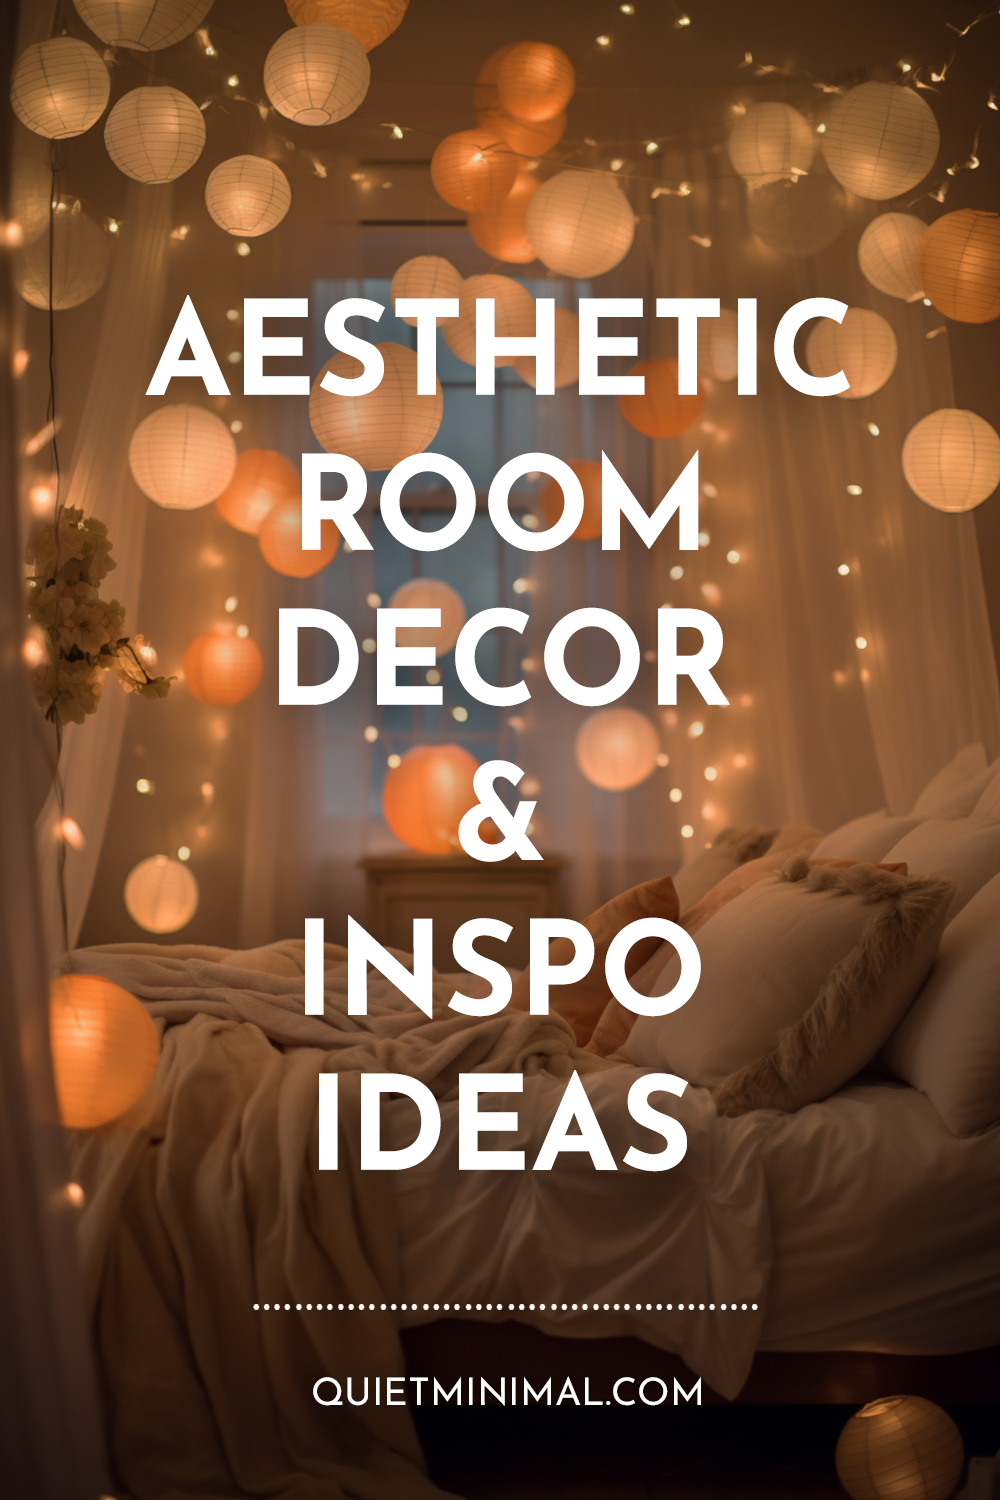 An aesthetic bed with inspiring ideas for room decor.